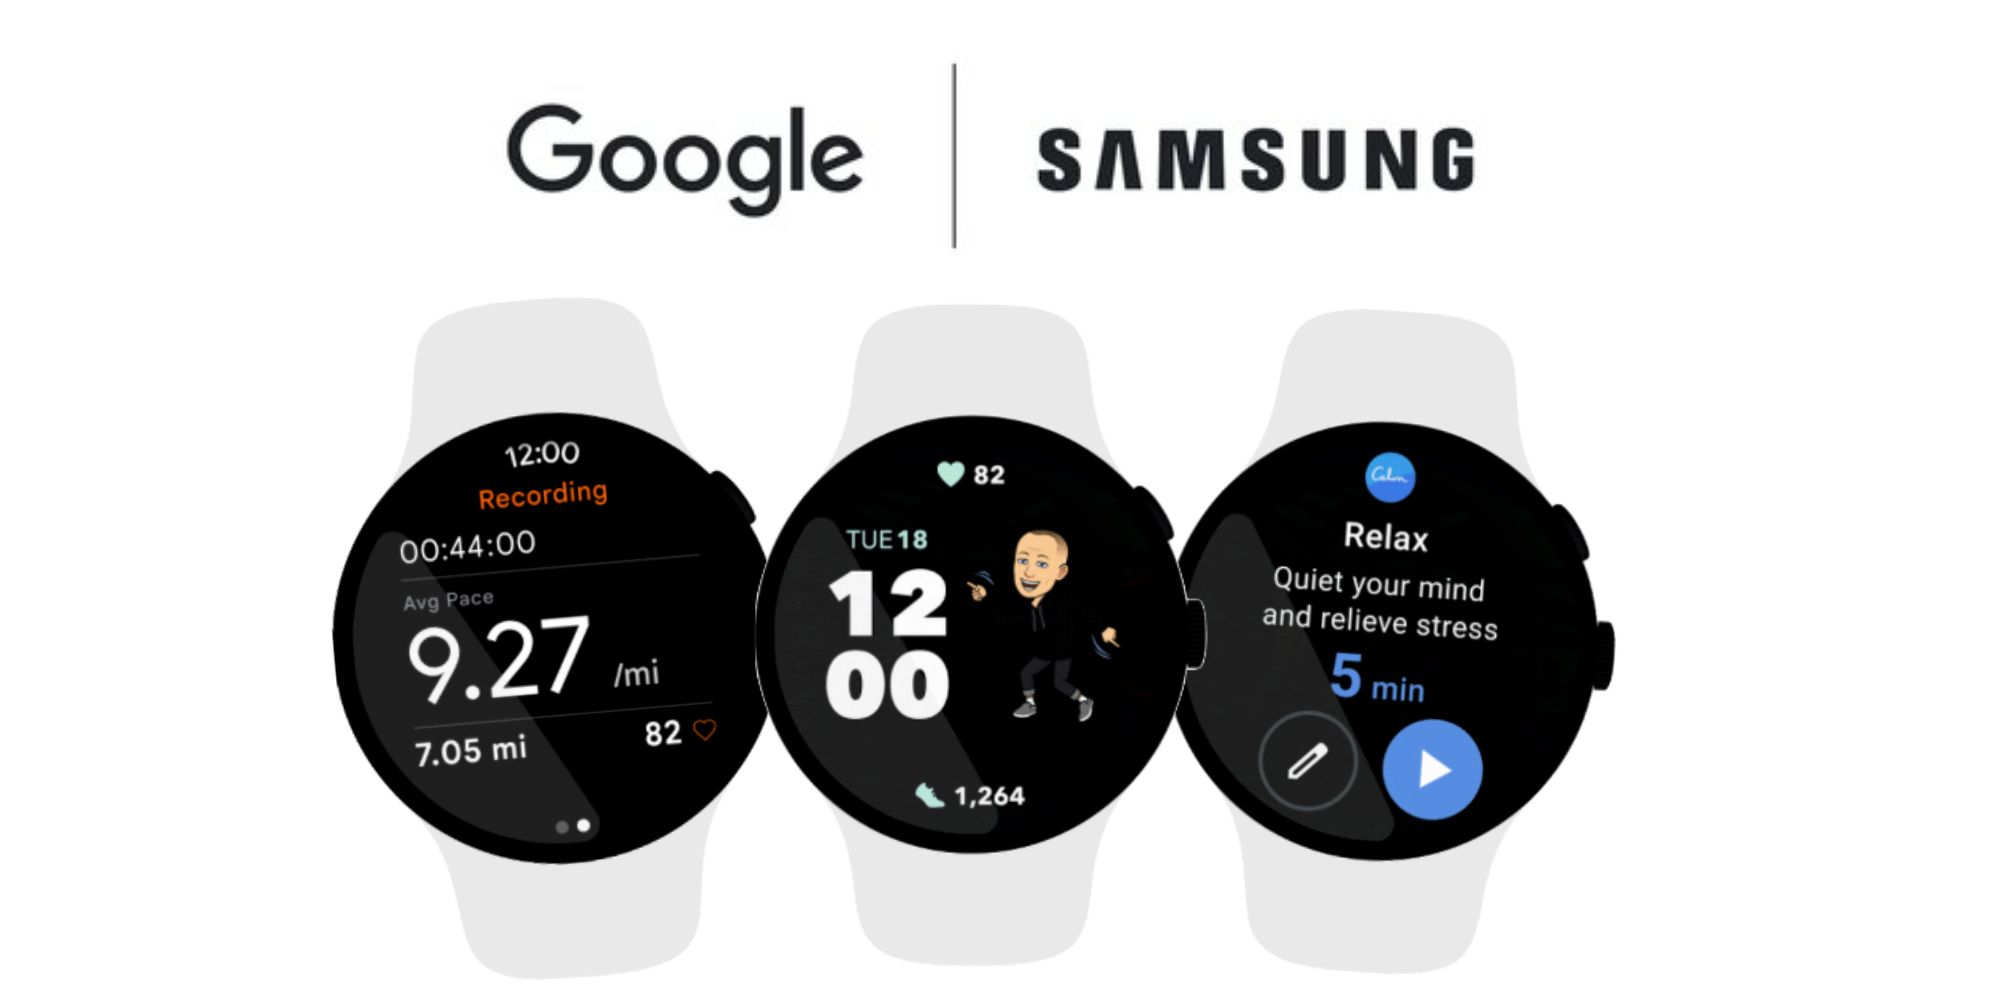 Google and Samsung logos above Wear OS renders